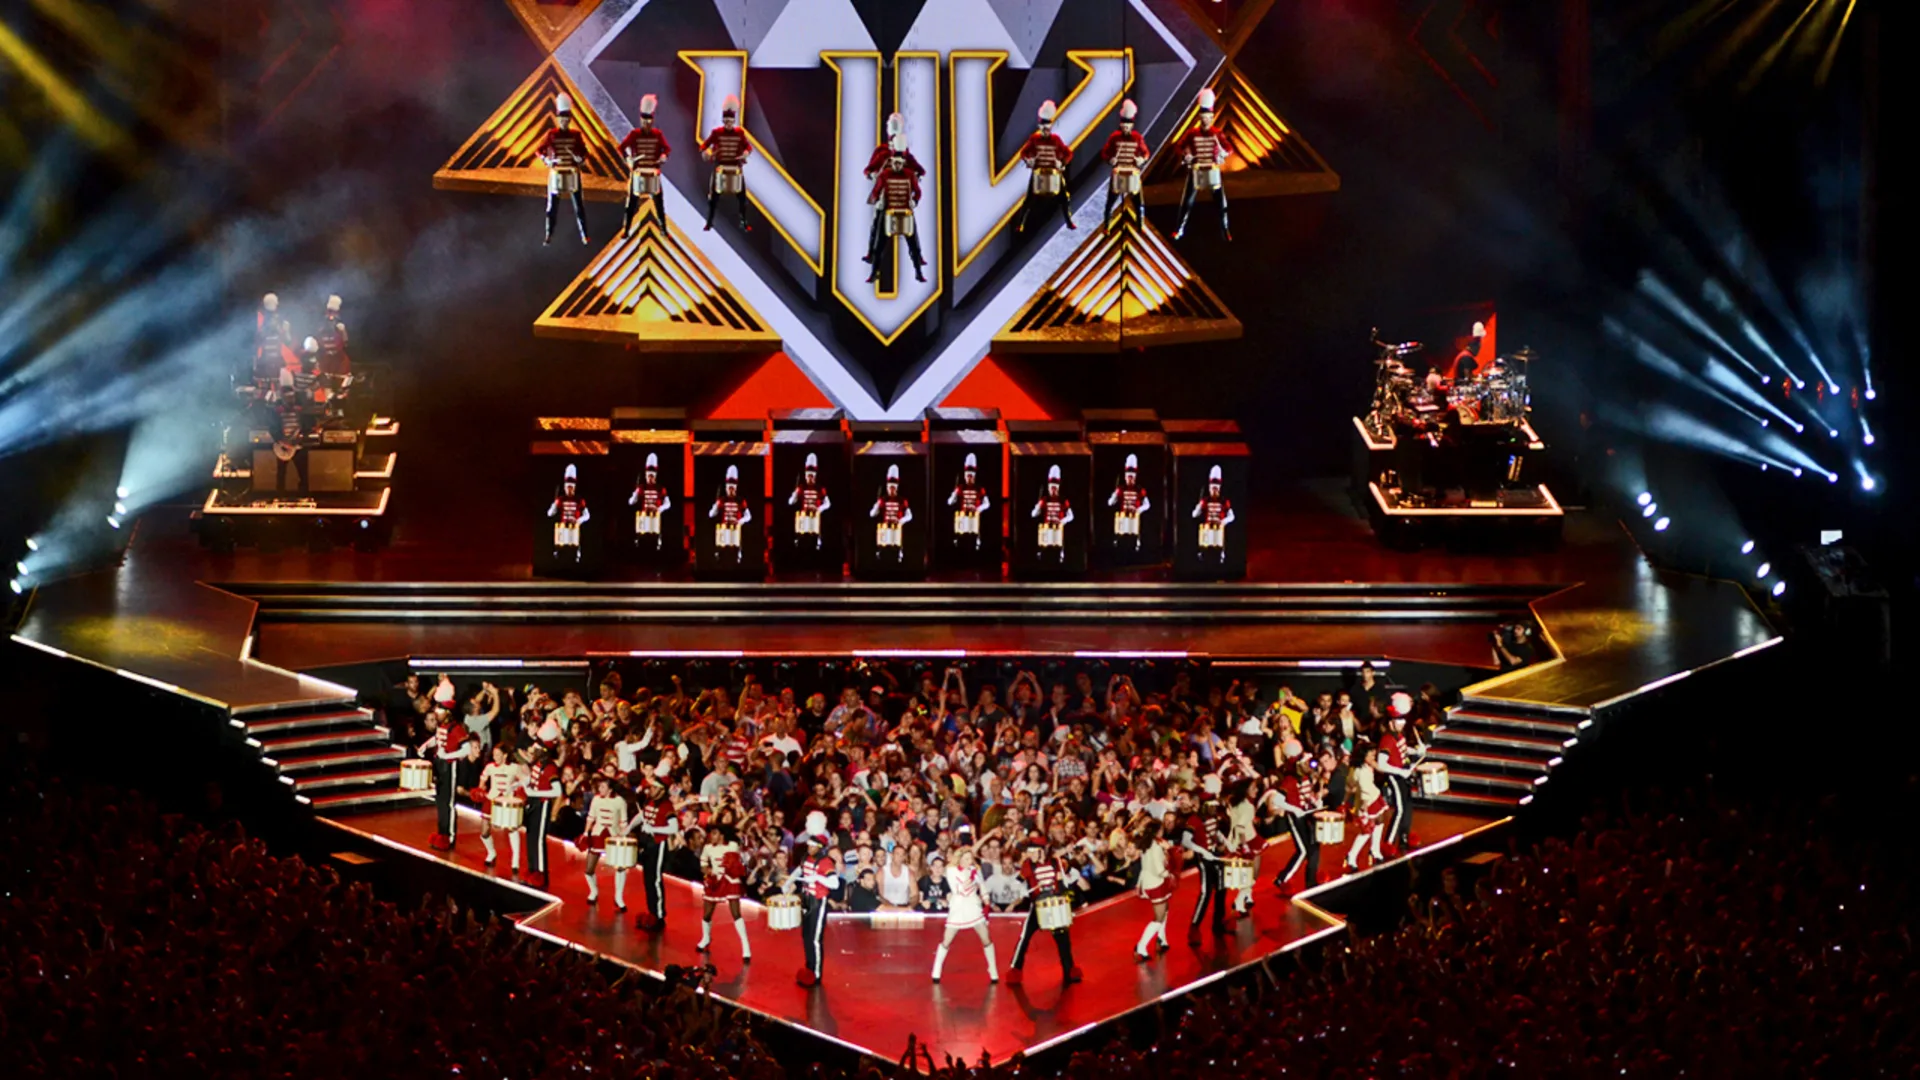 Scenes From Madonna's MDNA Tour